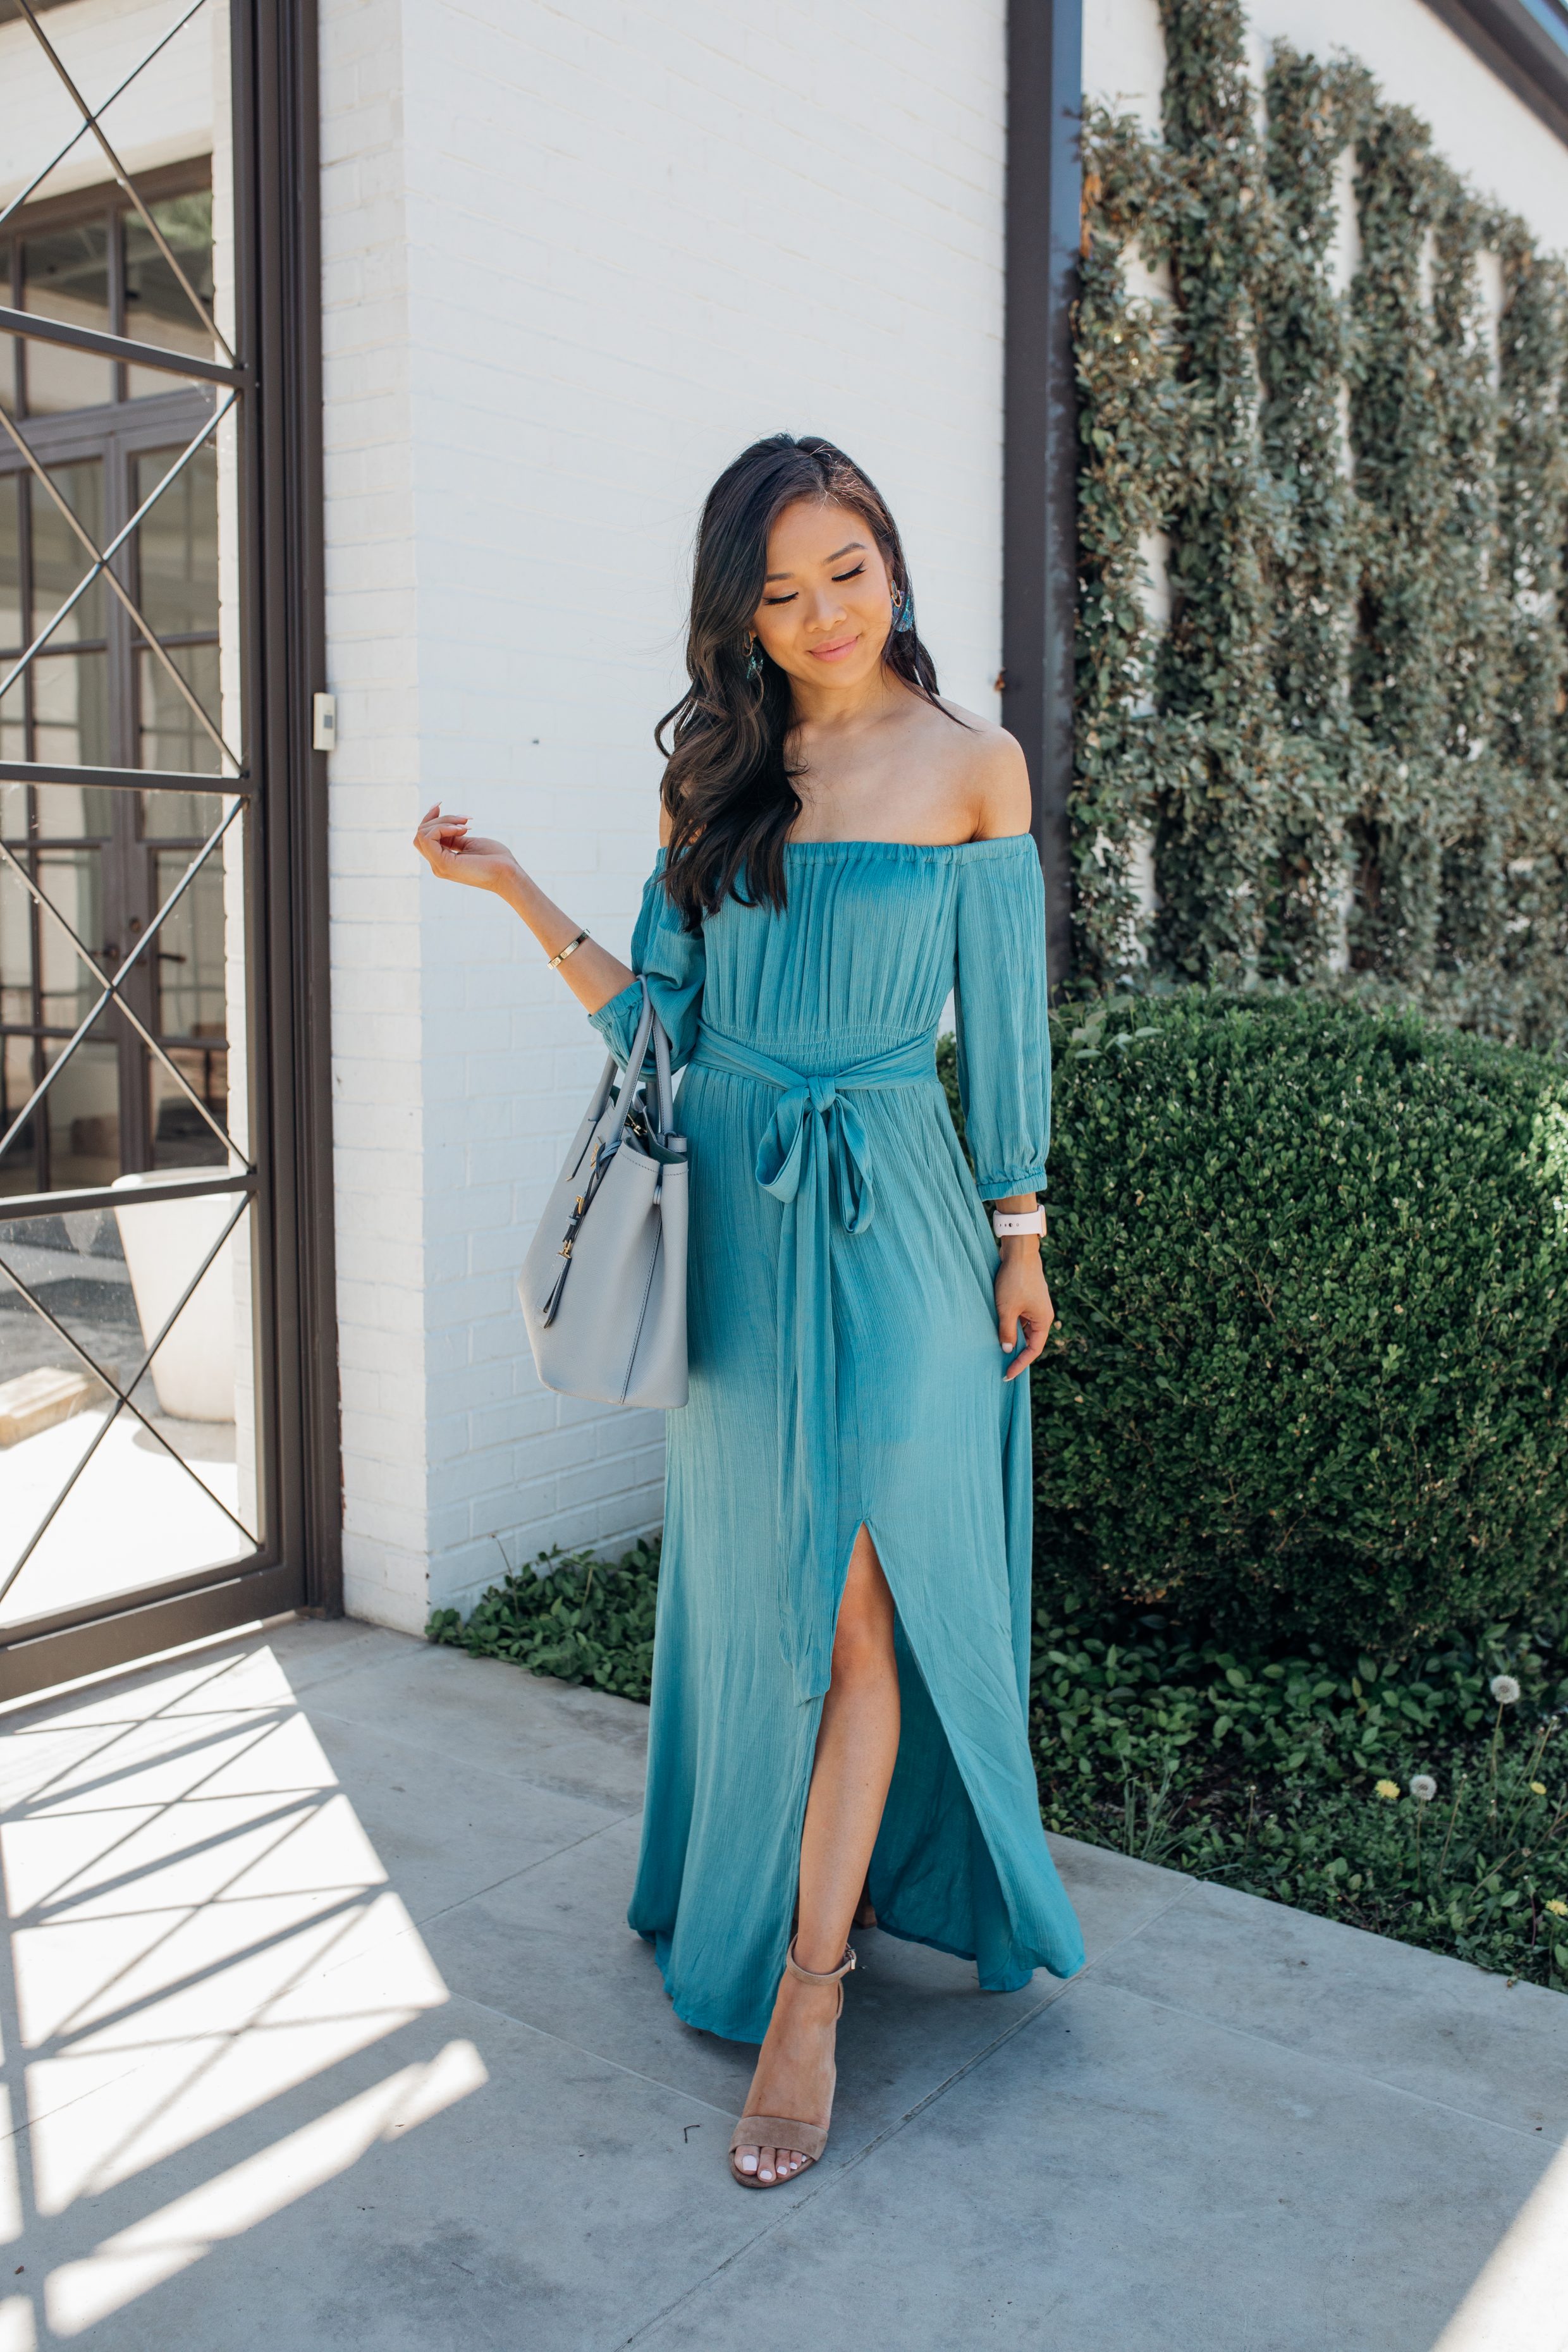 Blogger Hoang-Kim wears a teal off-the-shoulder maxi